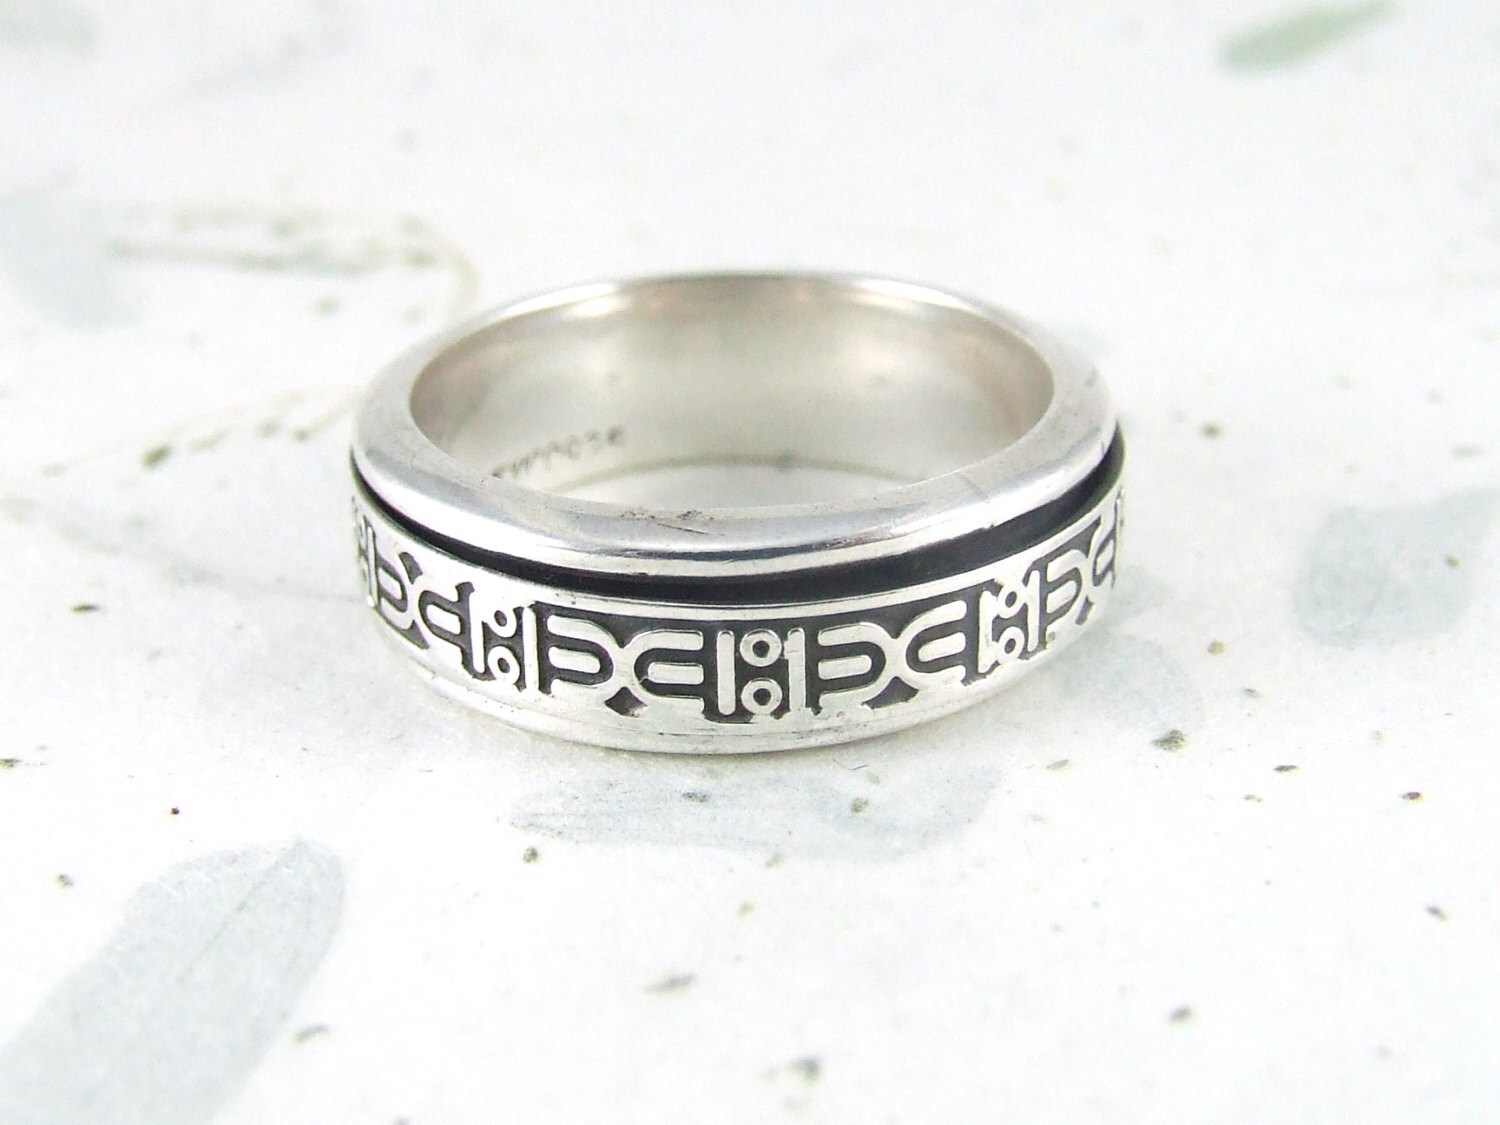 Vintage Mexico ring sterling silver spinner ring size 12